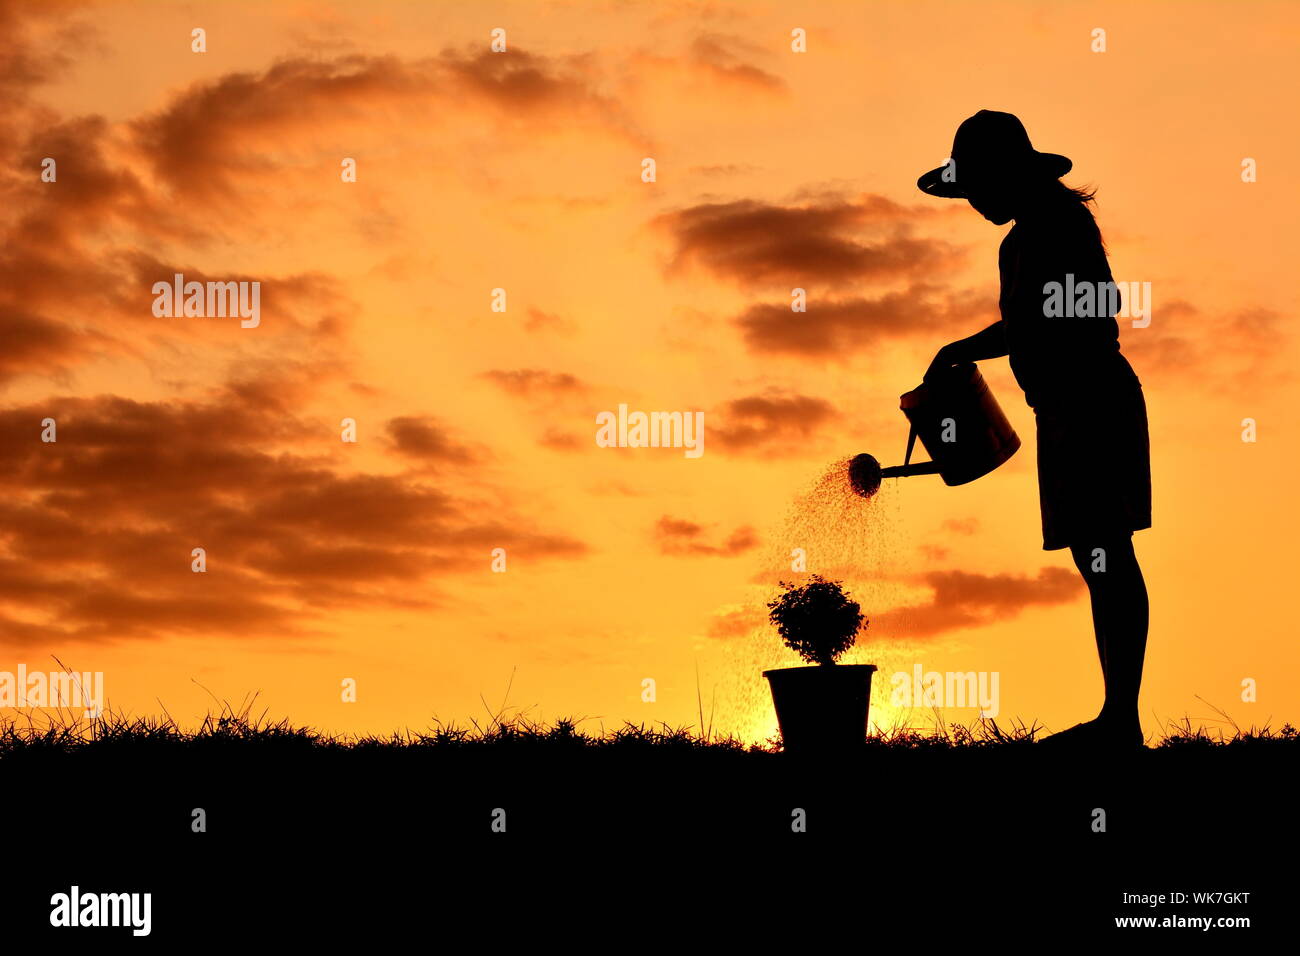 Silhouette Of Woman Watering Potted Plant Stock Photo